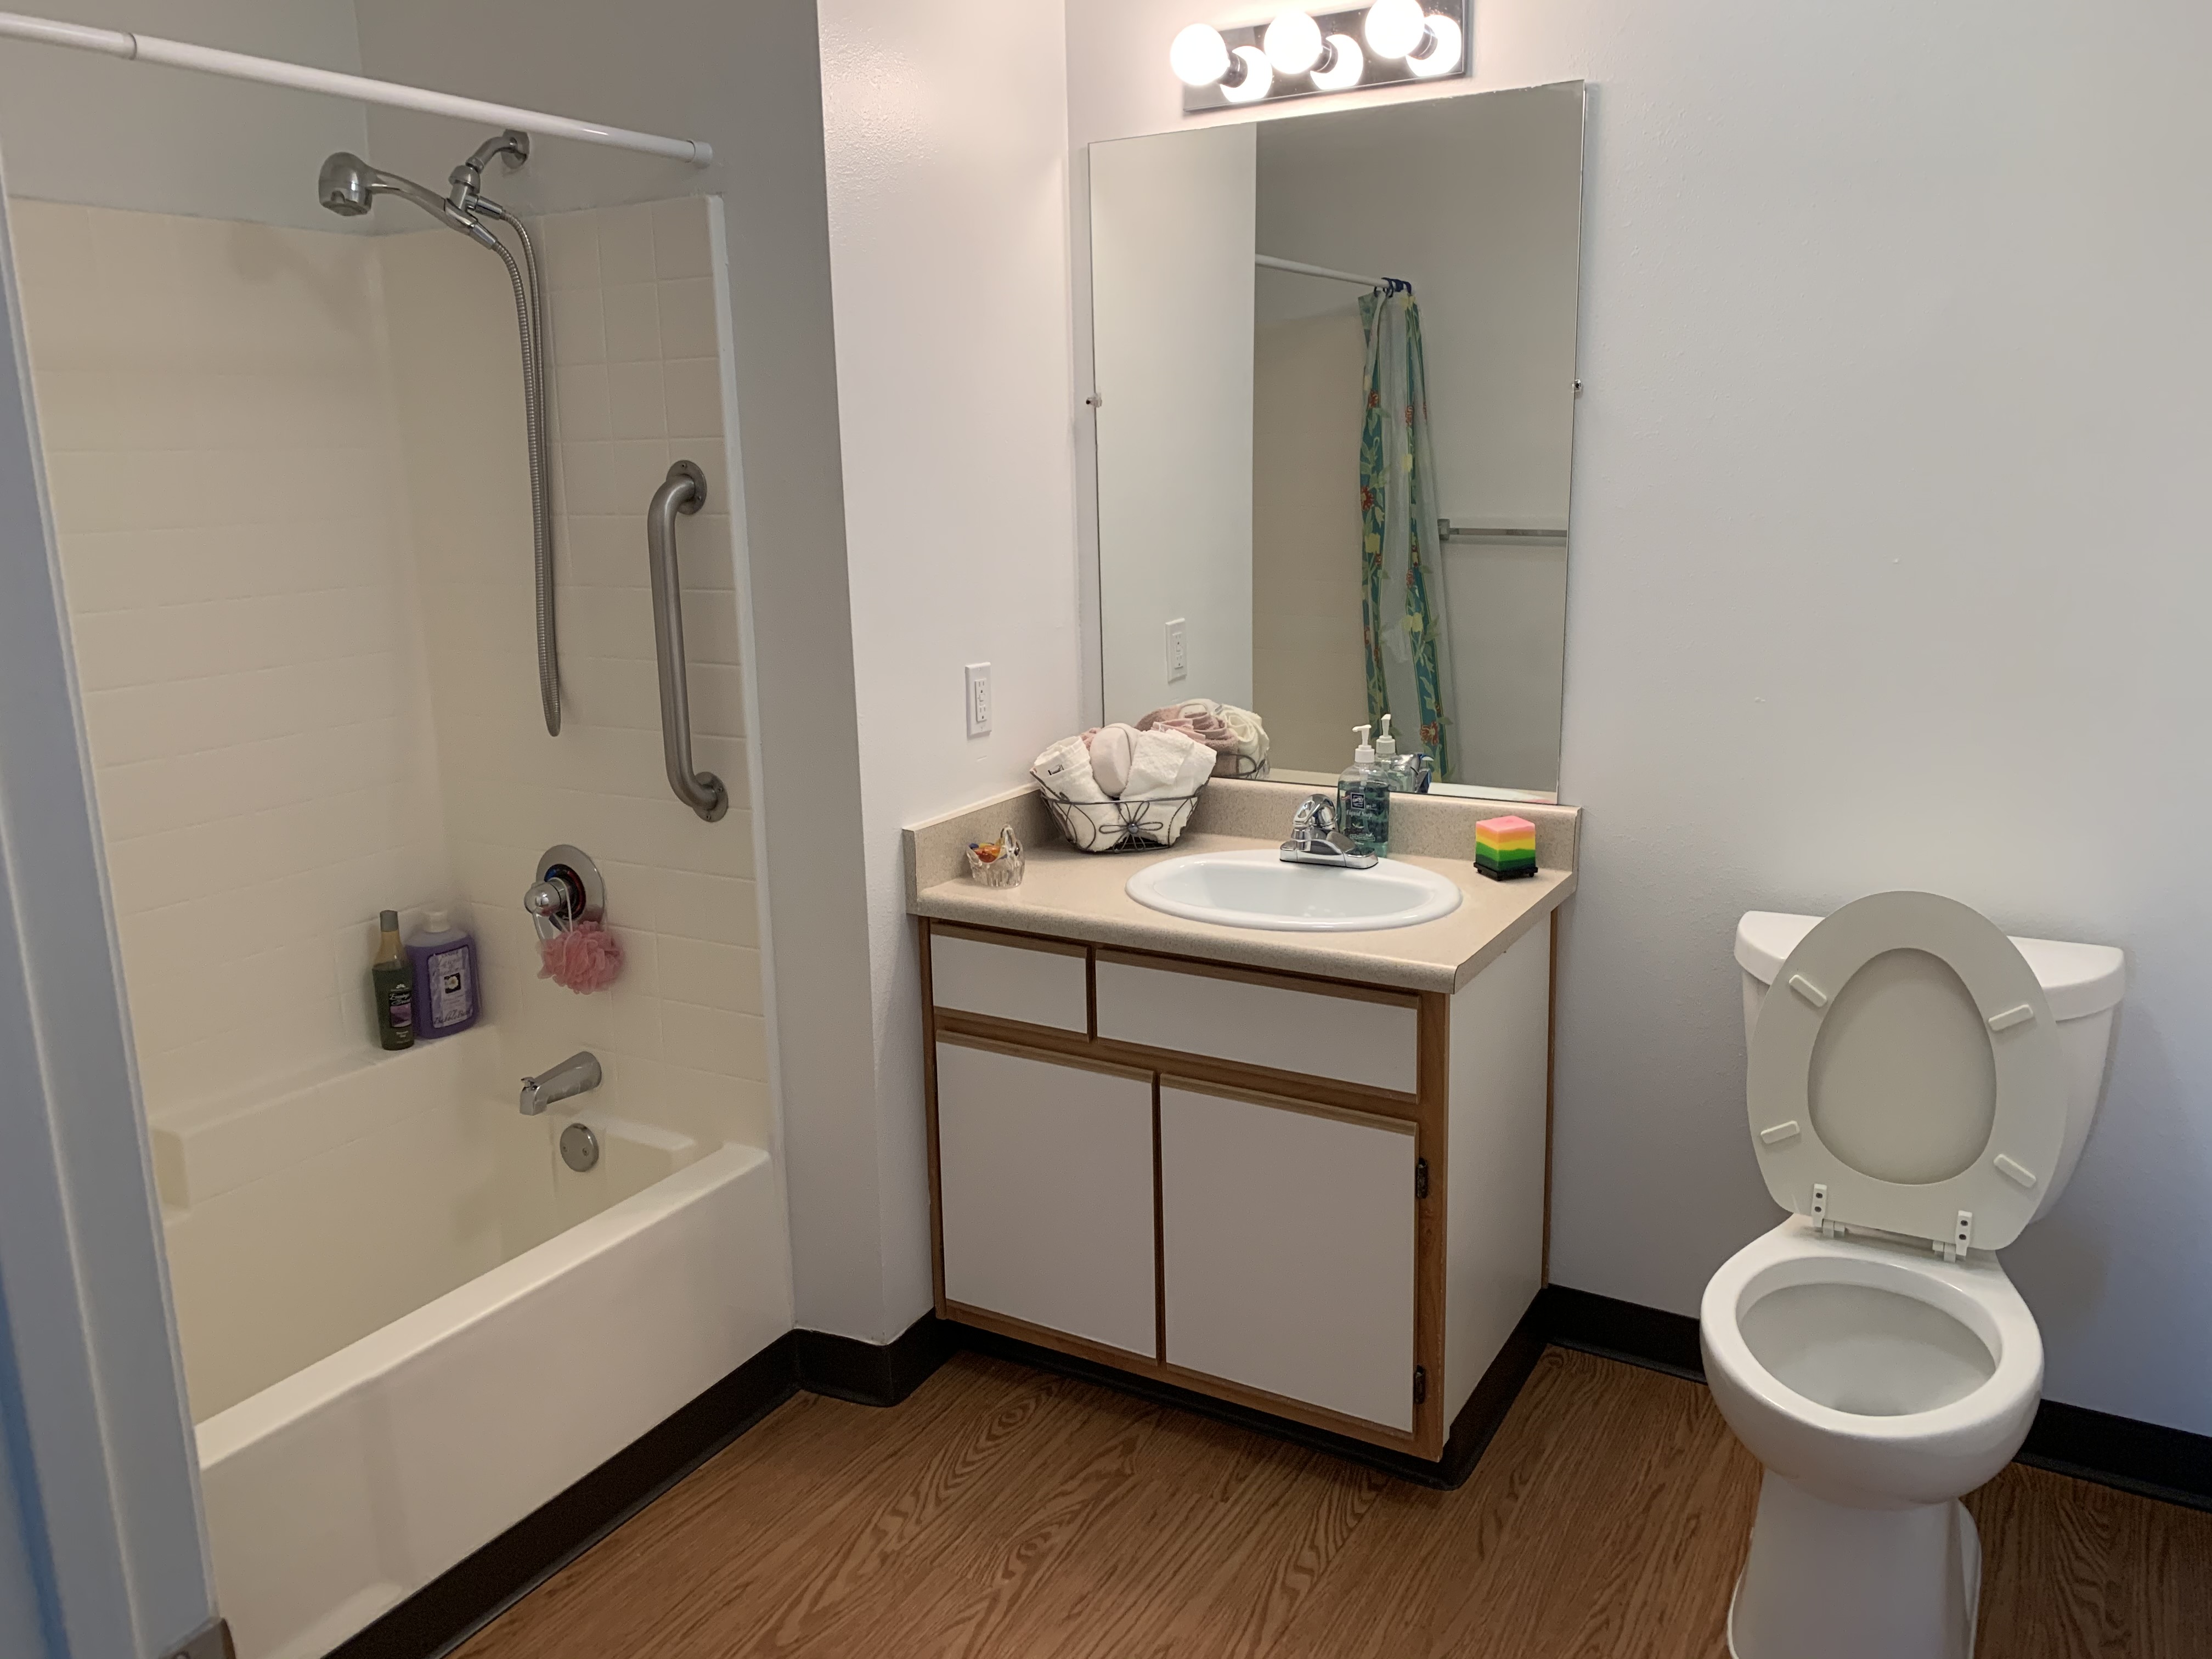 View of a bathroom. The bathtub has a grab bar and the shower head has hose. Next to it is a sink with lower canbinet, a mirror above it, and three light bulbs above the mirror, and a toilet next to the sink Room has wood flooring.